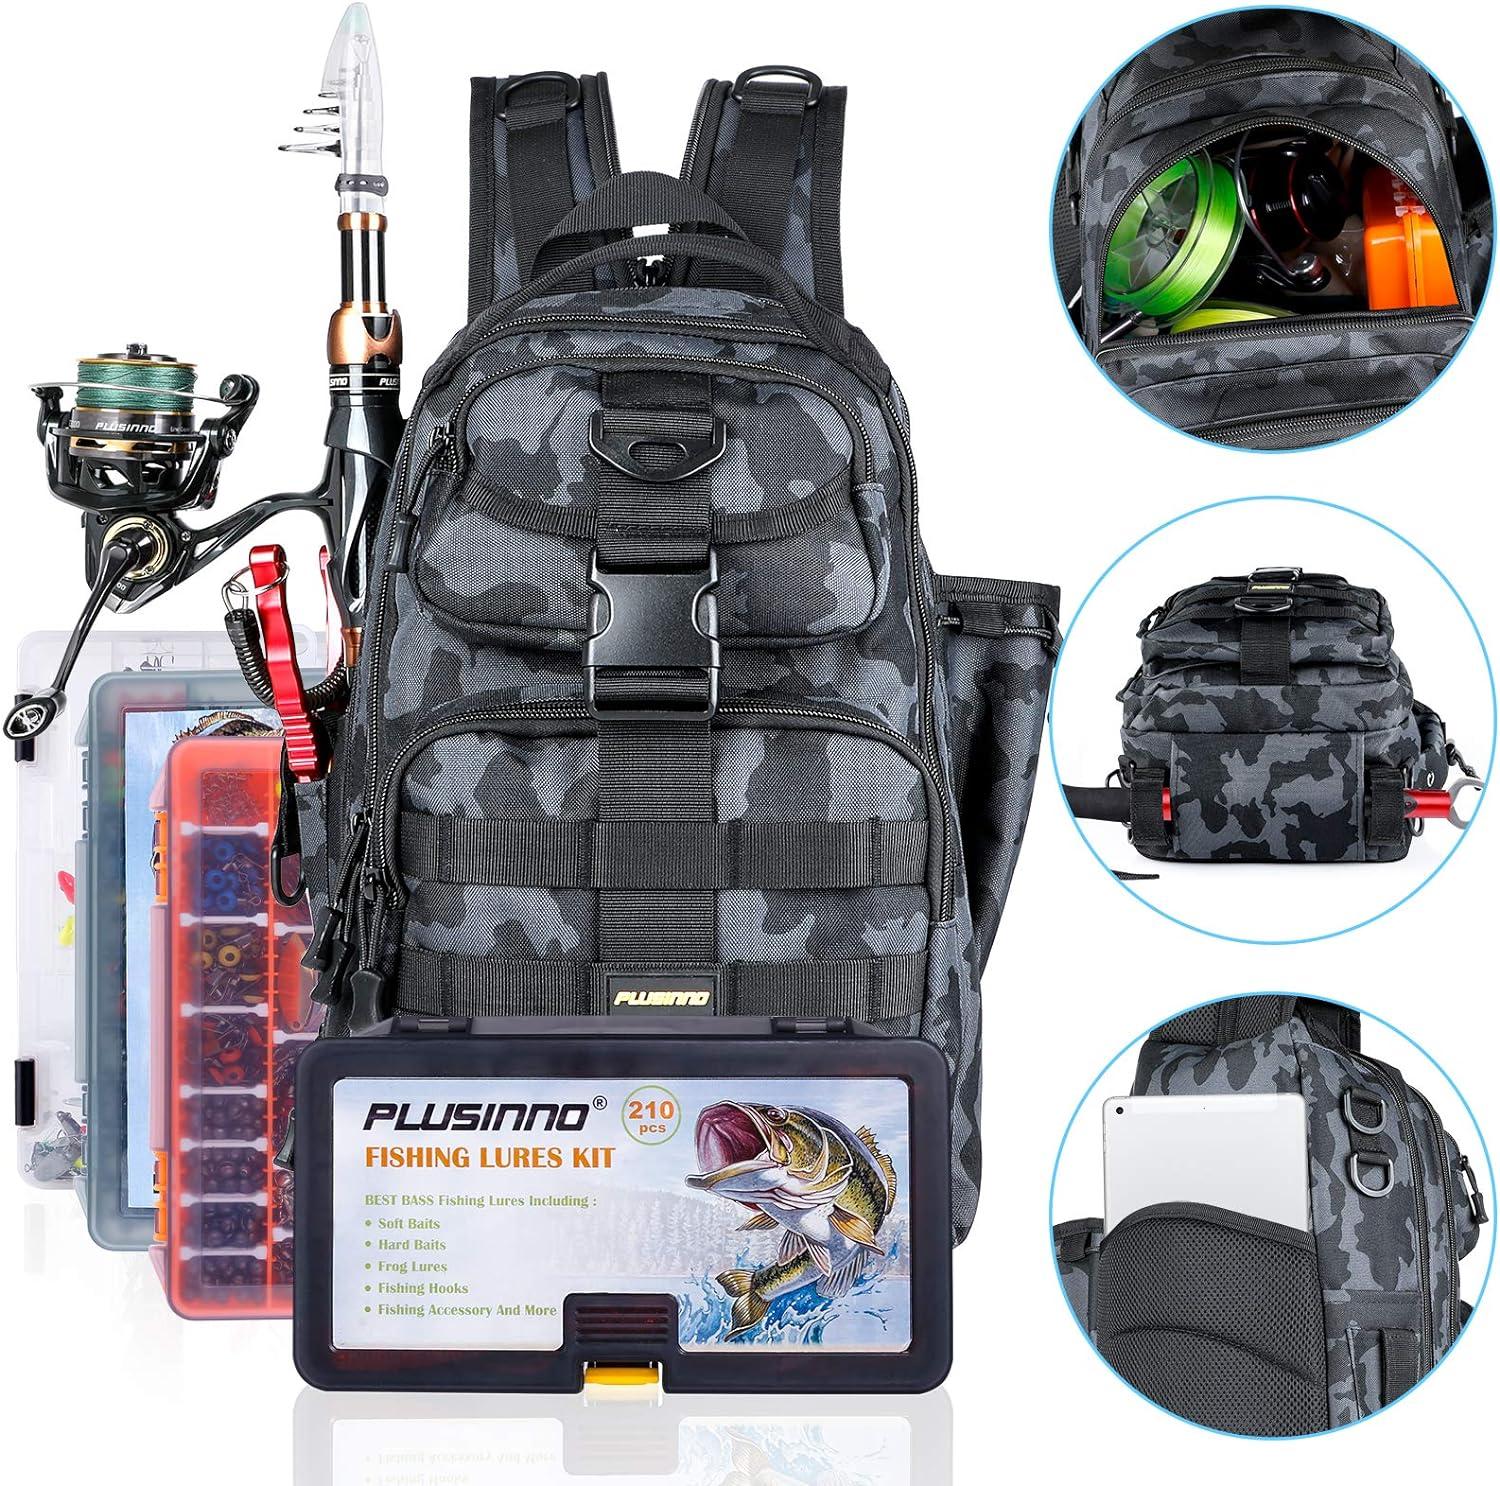 PLUSINNO Fishing Backpack Tackle Bag Water-Resistant Fishing Backpack with  Rod Holder Large Fishing Bag for Fishing Gear Ideal Fishing Gifts for Men  Large(16.5*10.5*5.5inch)-Black Camo